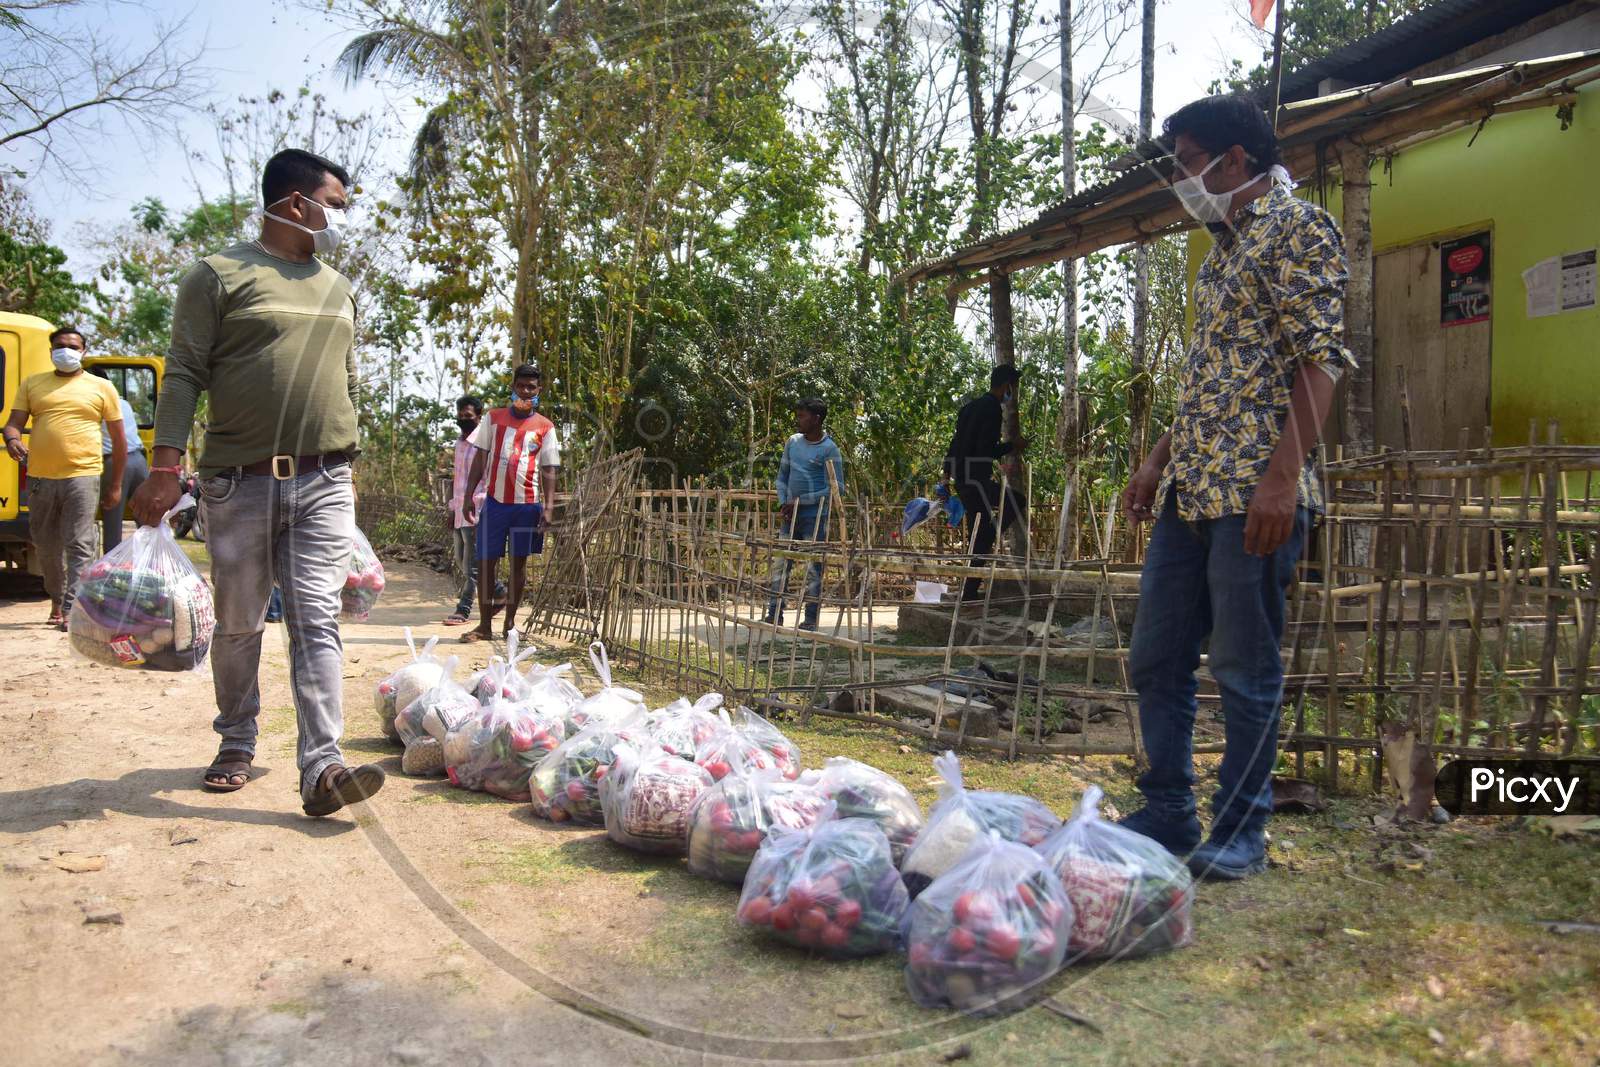 Volunteers Arrange Ration Before Distributing It Among Tea Tribe People During A Nationwide Lockdown Imposed In The Wake Of Coronavirus Pandemic At Samaguri In Nagaon District Of Assam